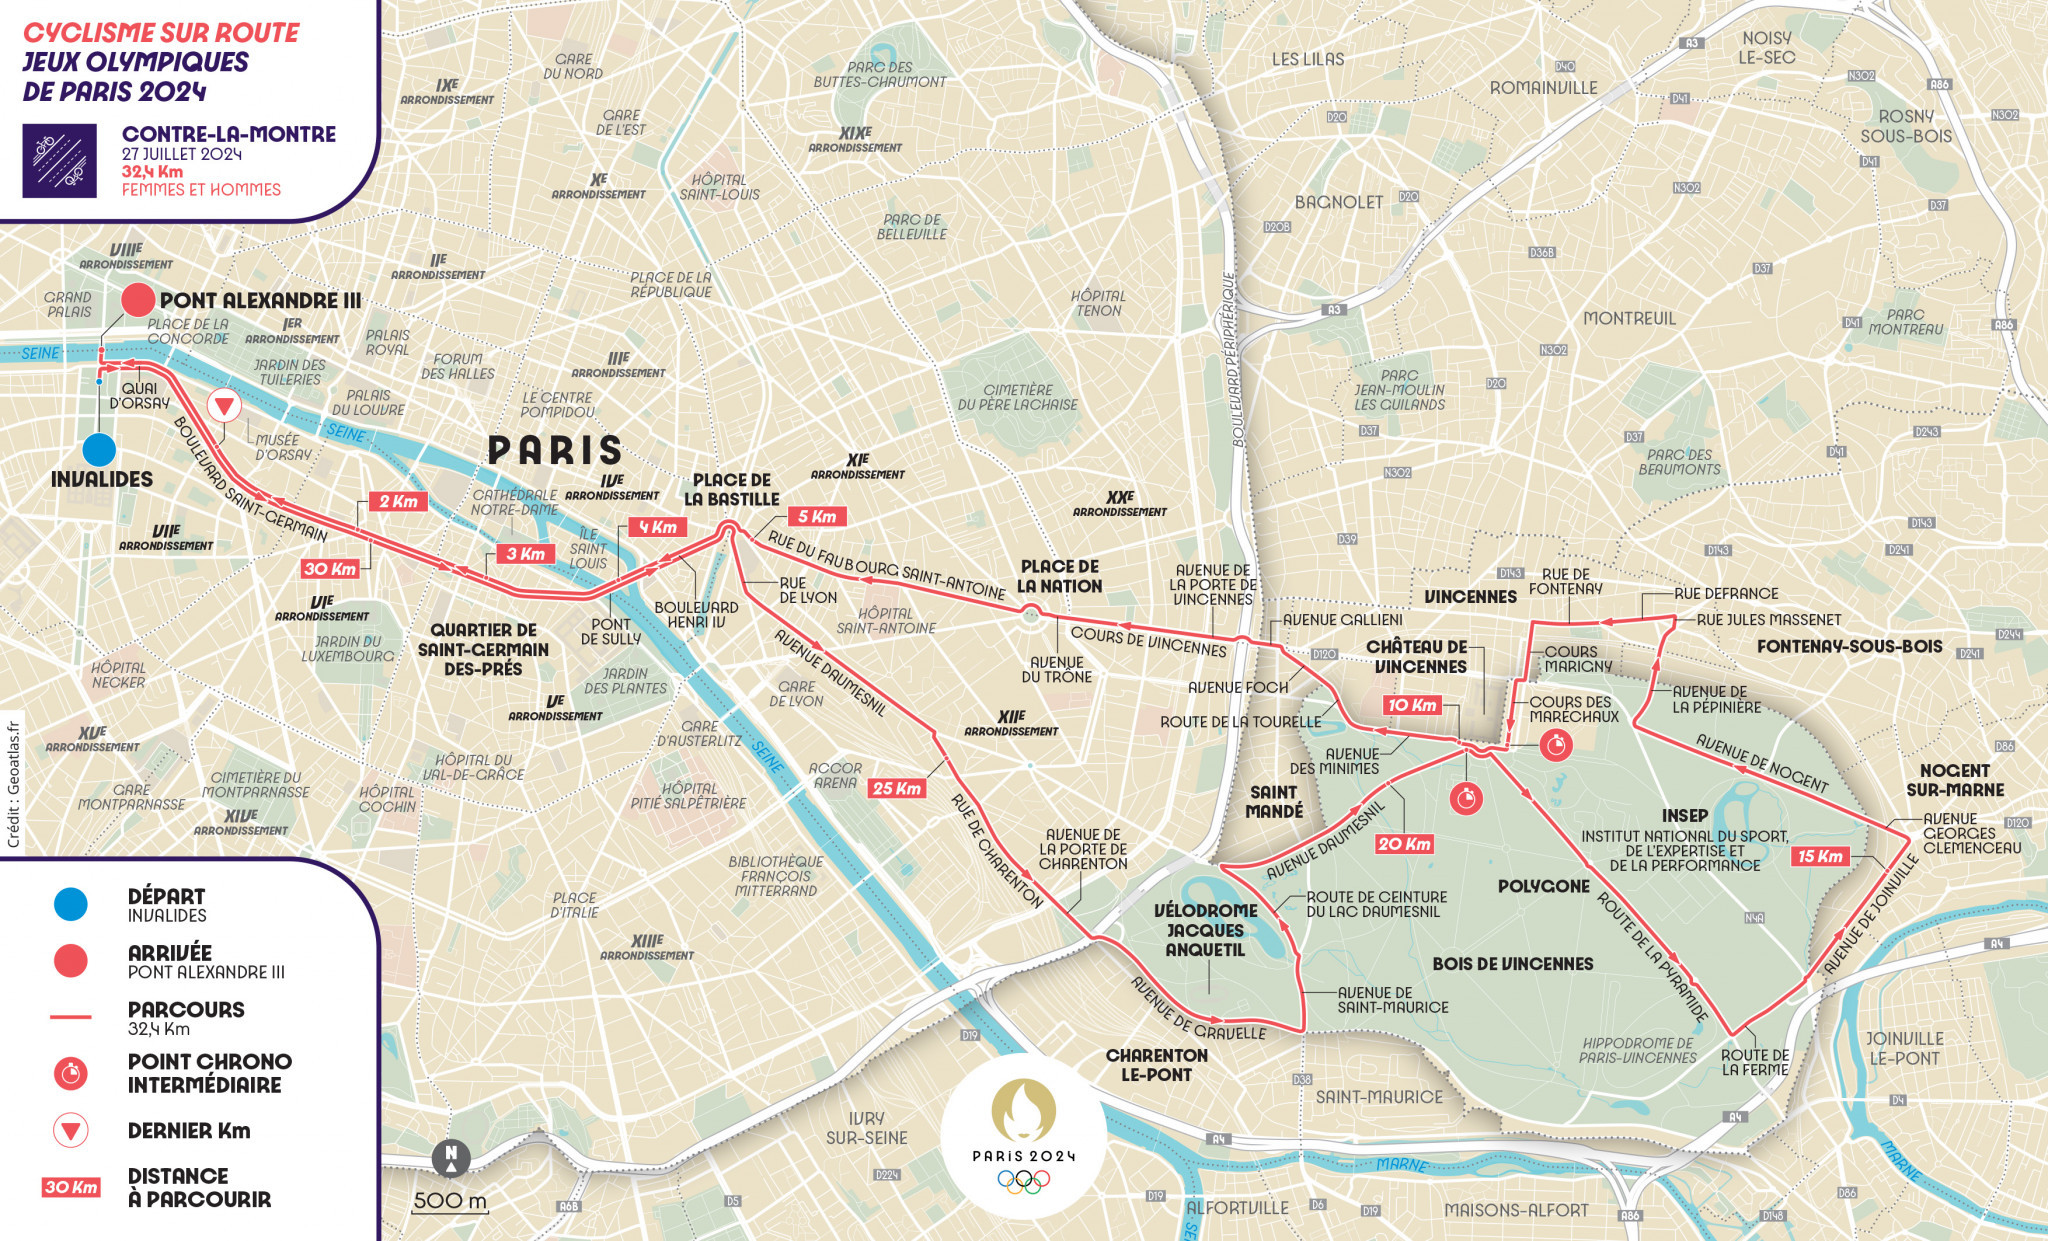 The time trial route will be identical for men and women for the first time©Paris 2024